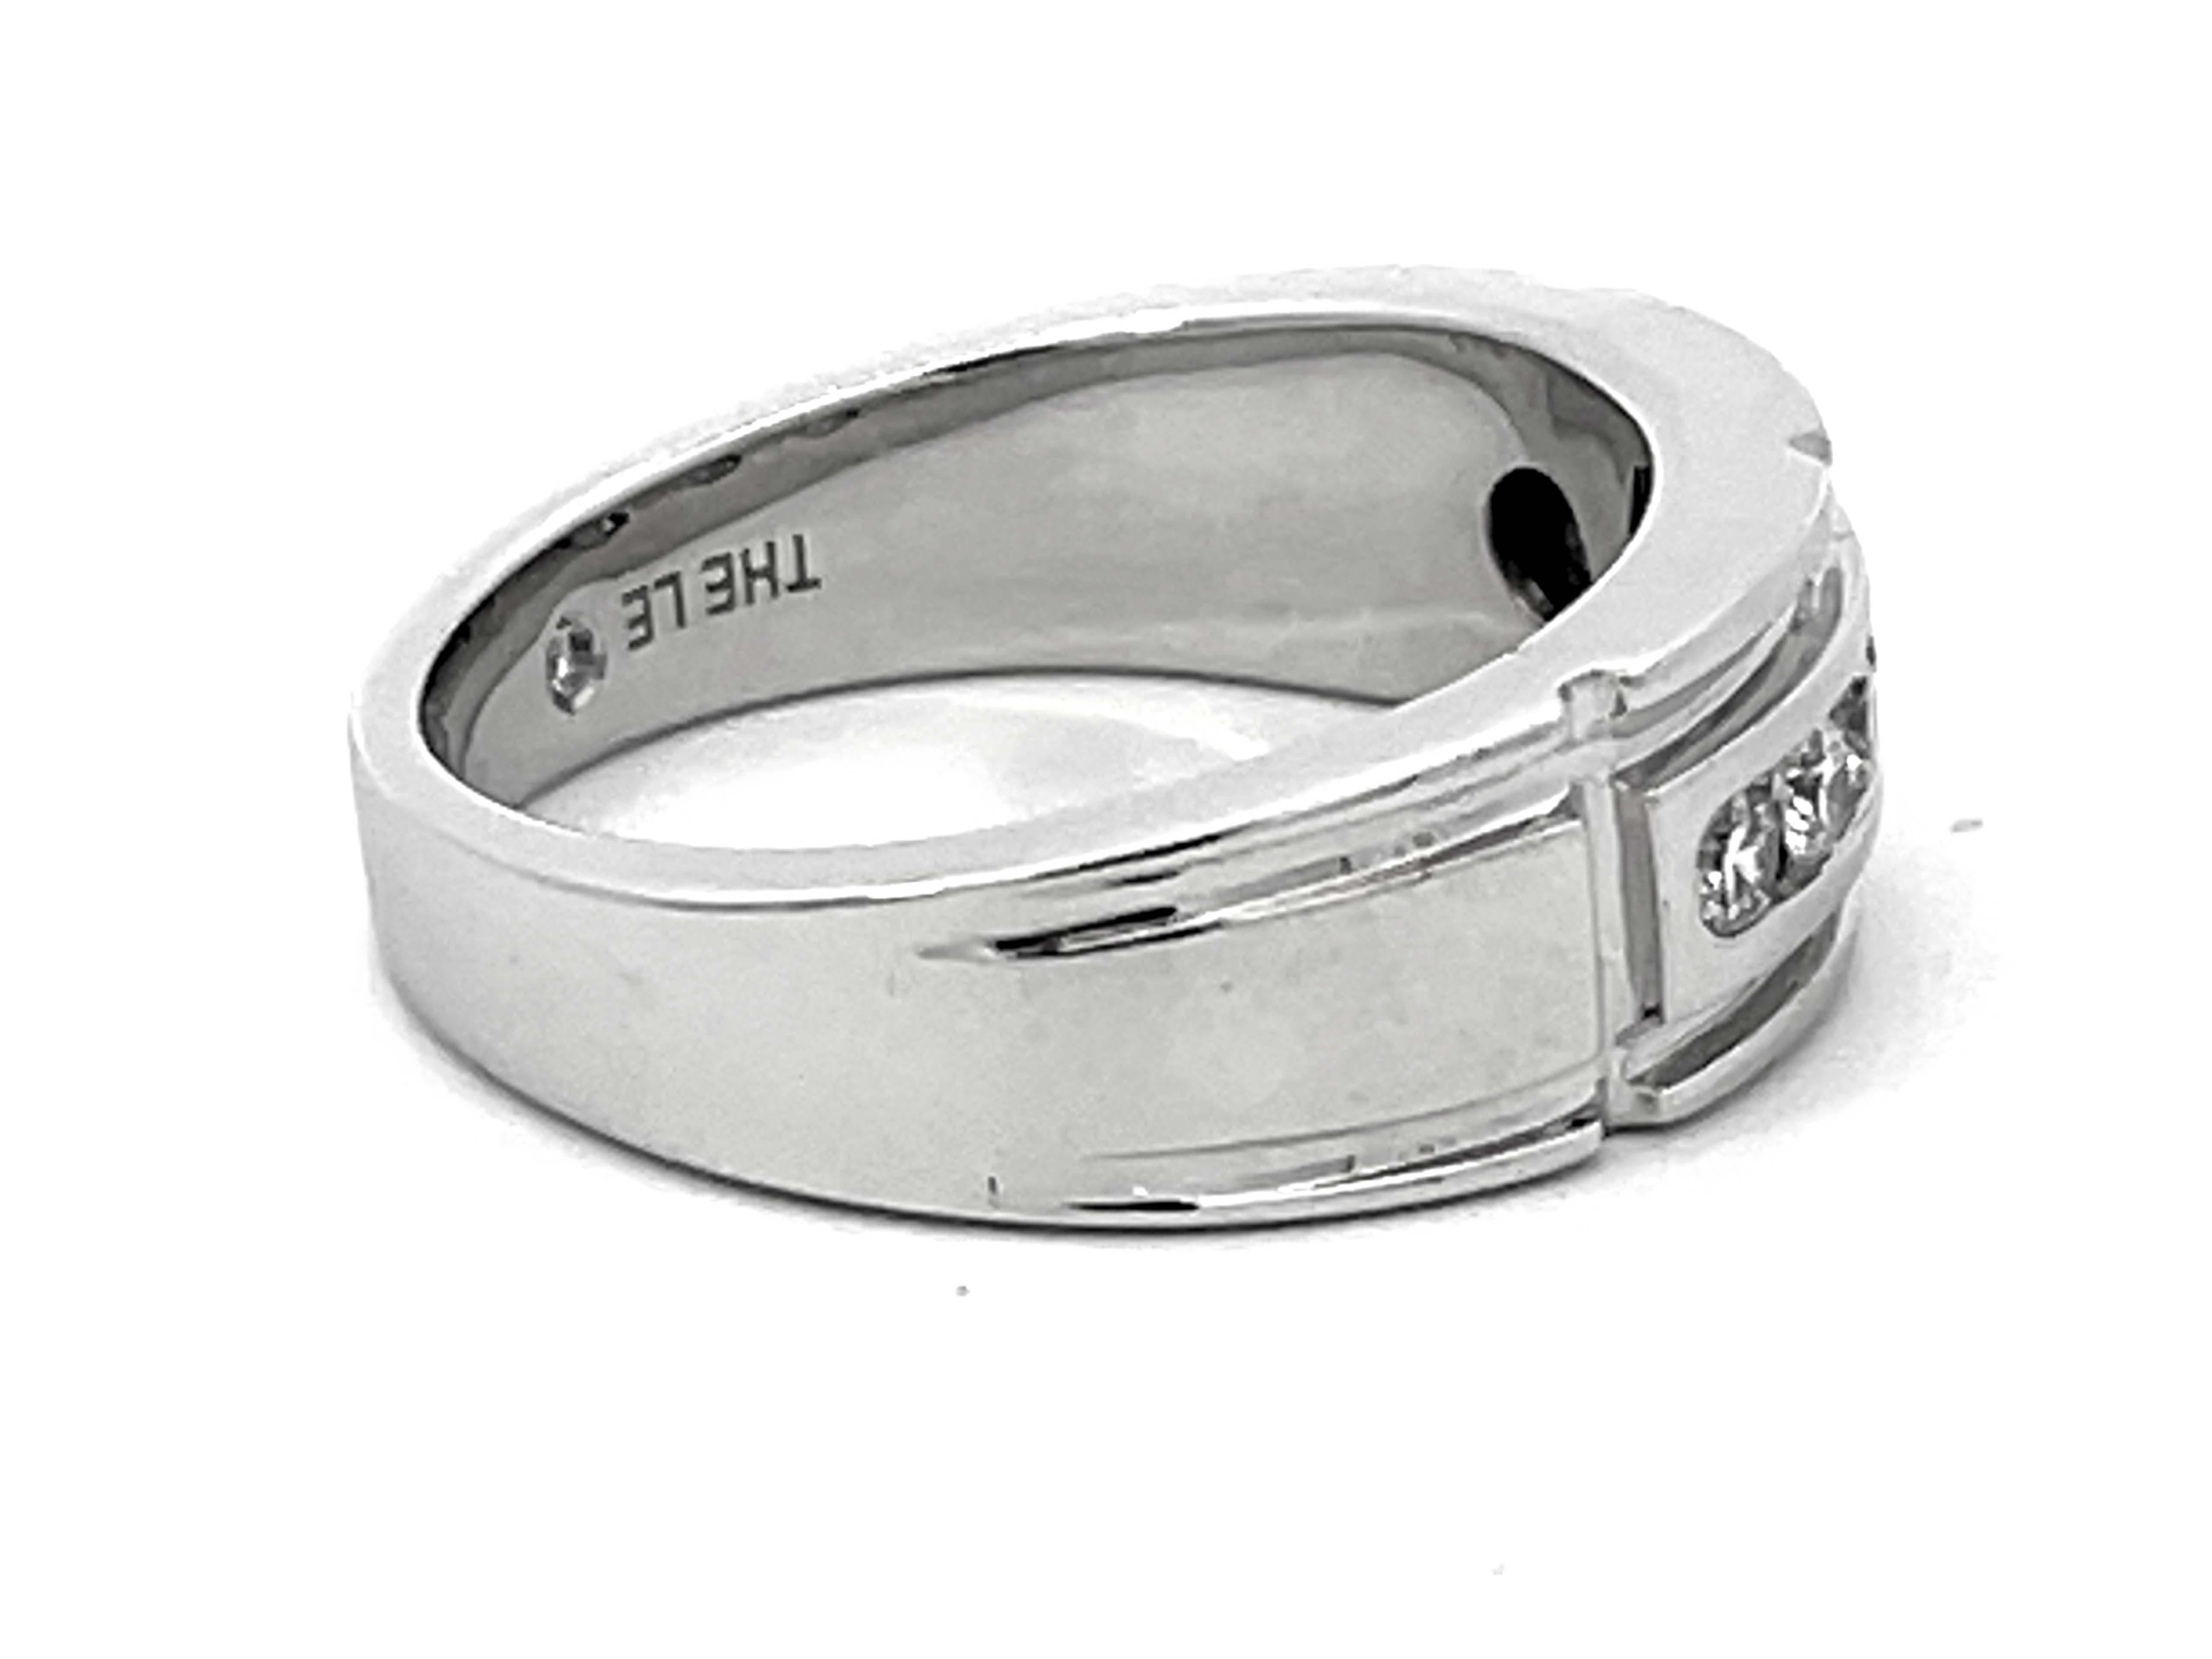 The Leo Mens Diamond Band Ring 14k White Gold In Excellent Condition For Sale In Honolulu, HI